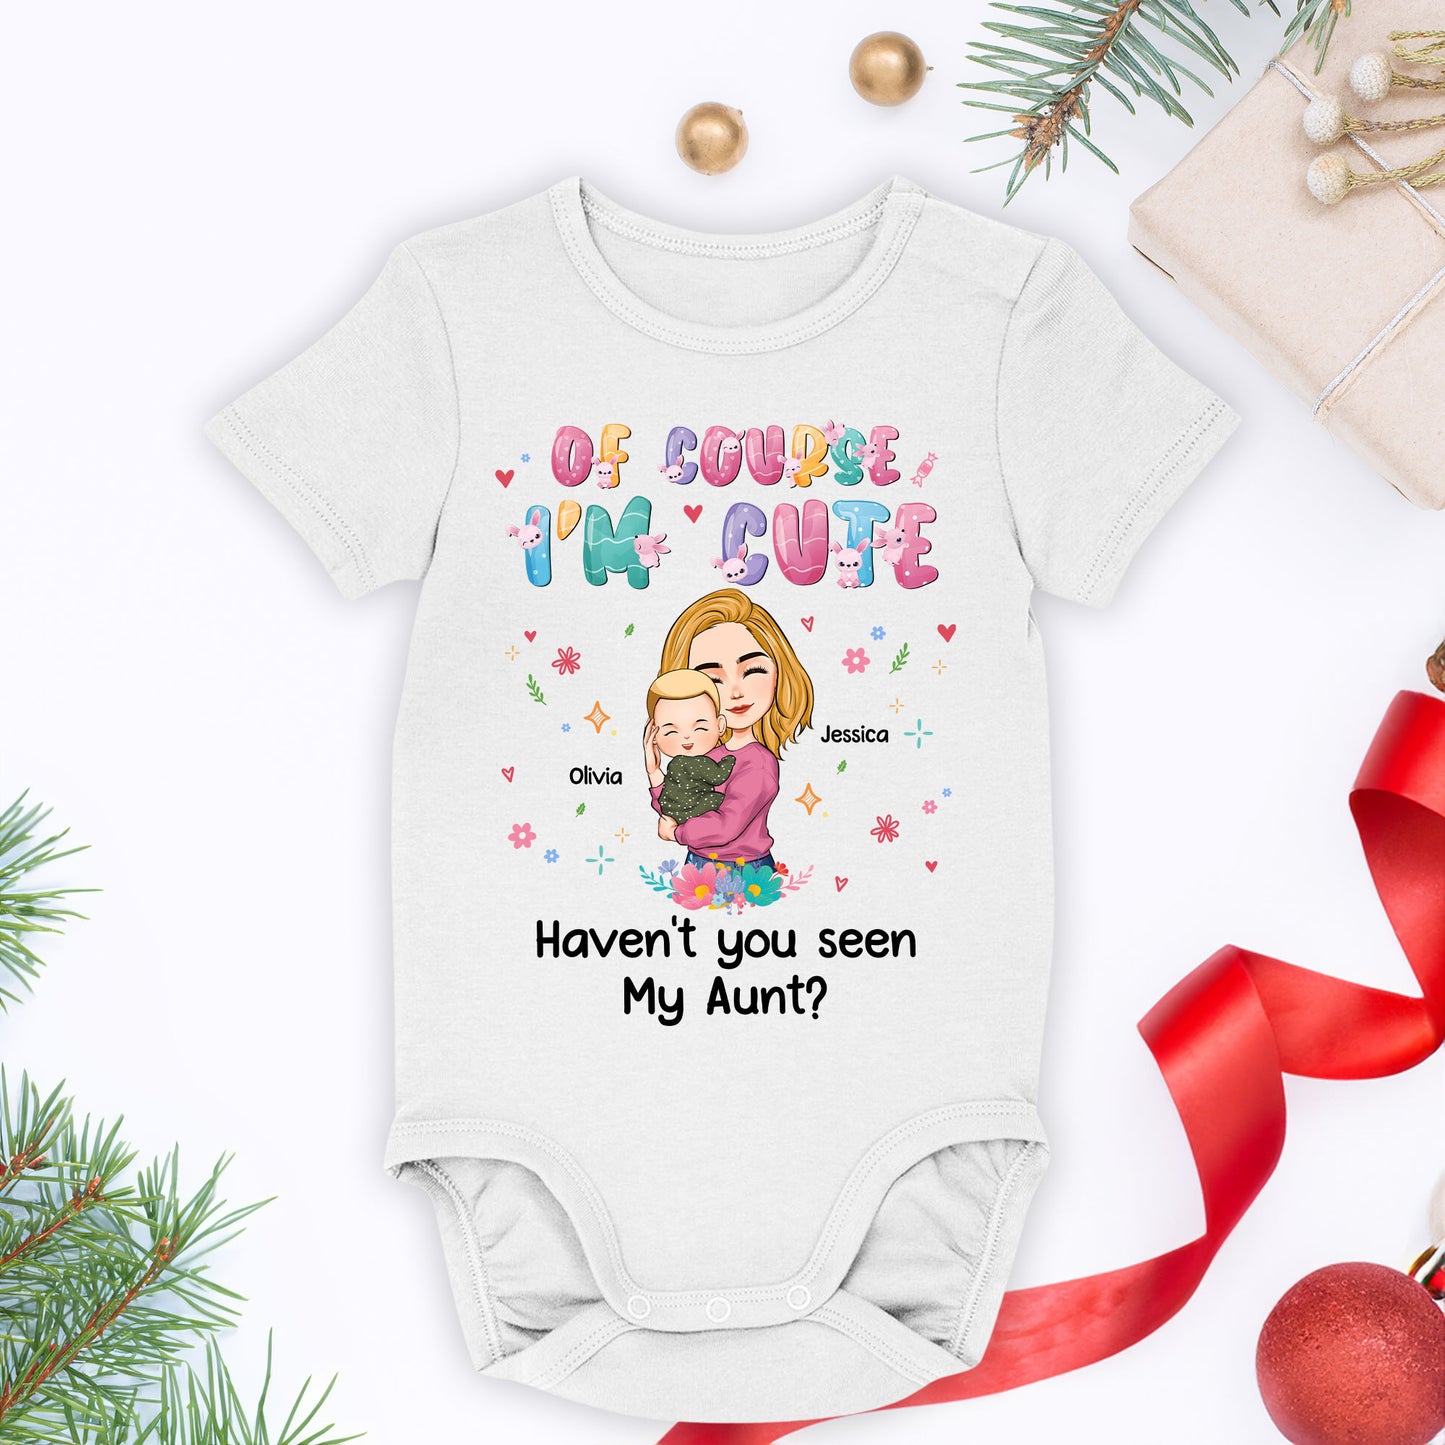 Of Course I'm Cute - Personalized Baby Onesie